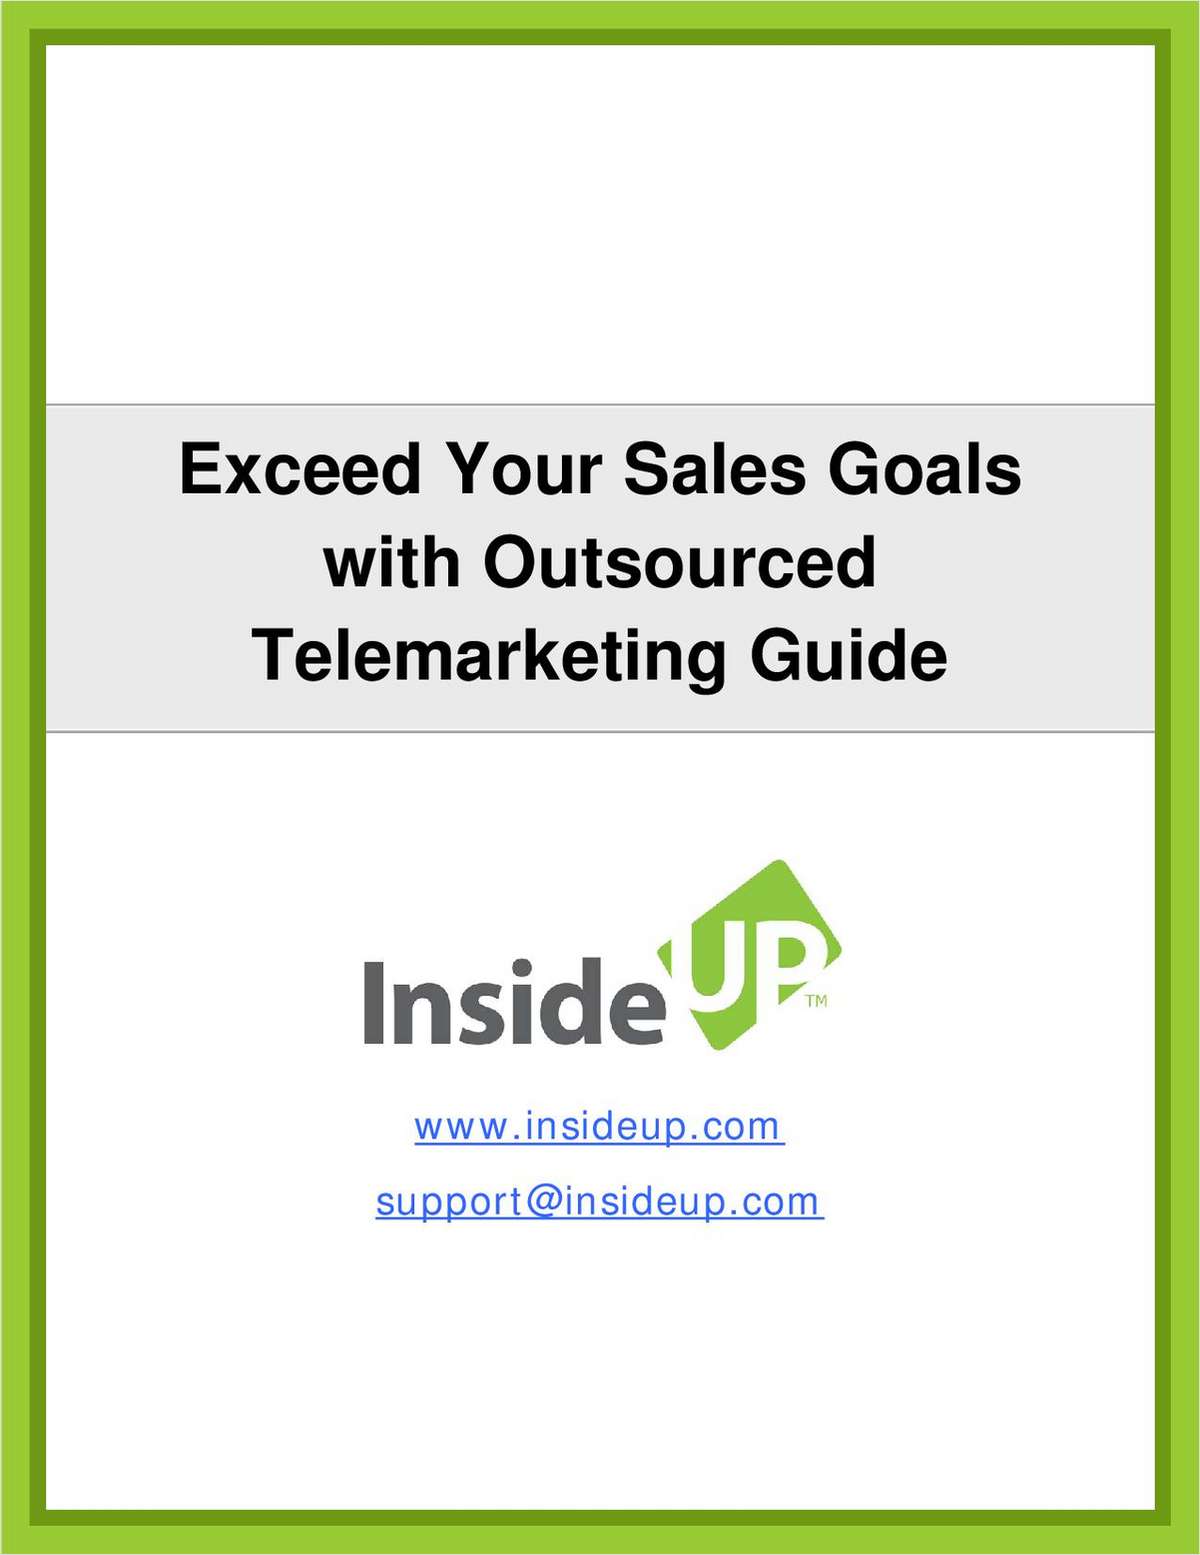 Exceed Your Sales Goals by Outsourced Telemarketing